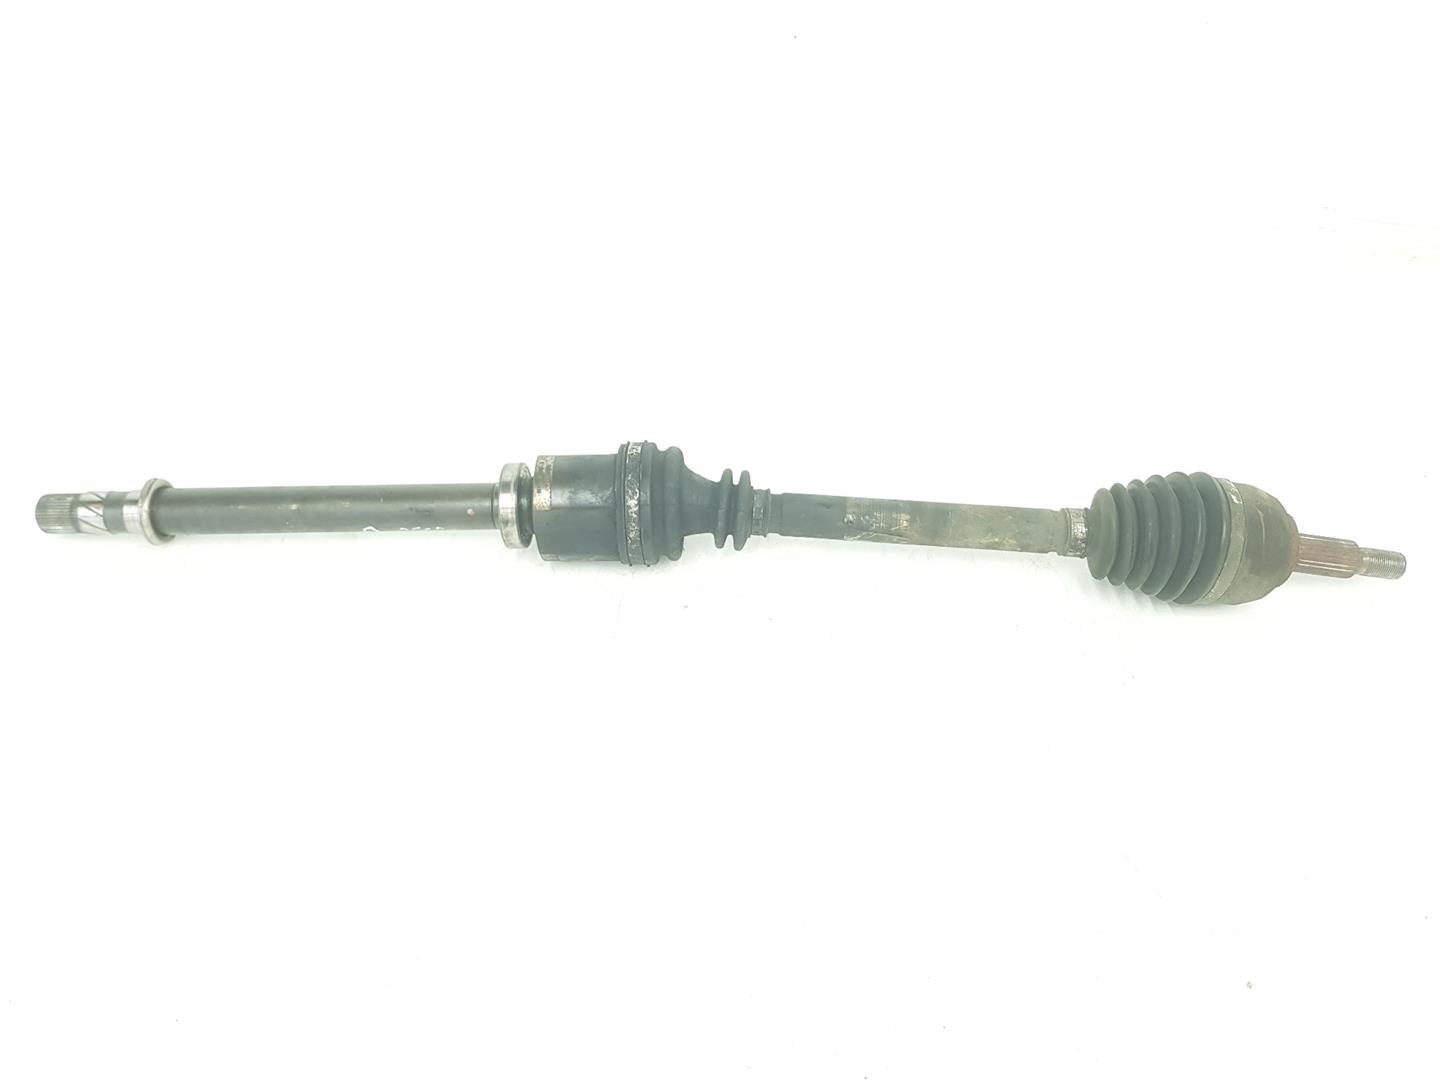 RENAULT Scenic 2 generation (2003-2010) Front Right Driveshaft 8200436366, 8200436366 20869612